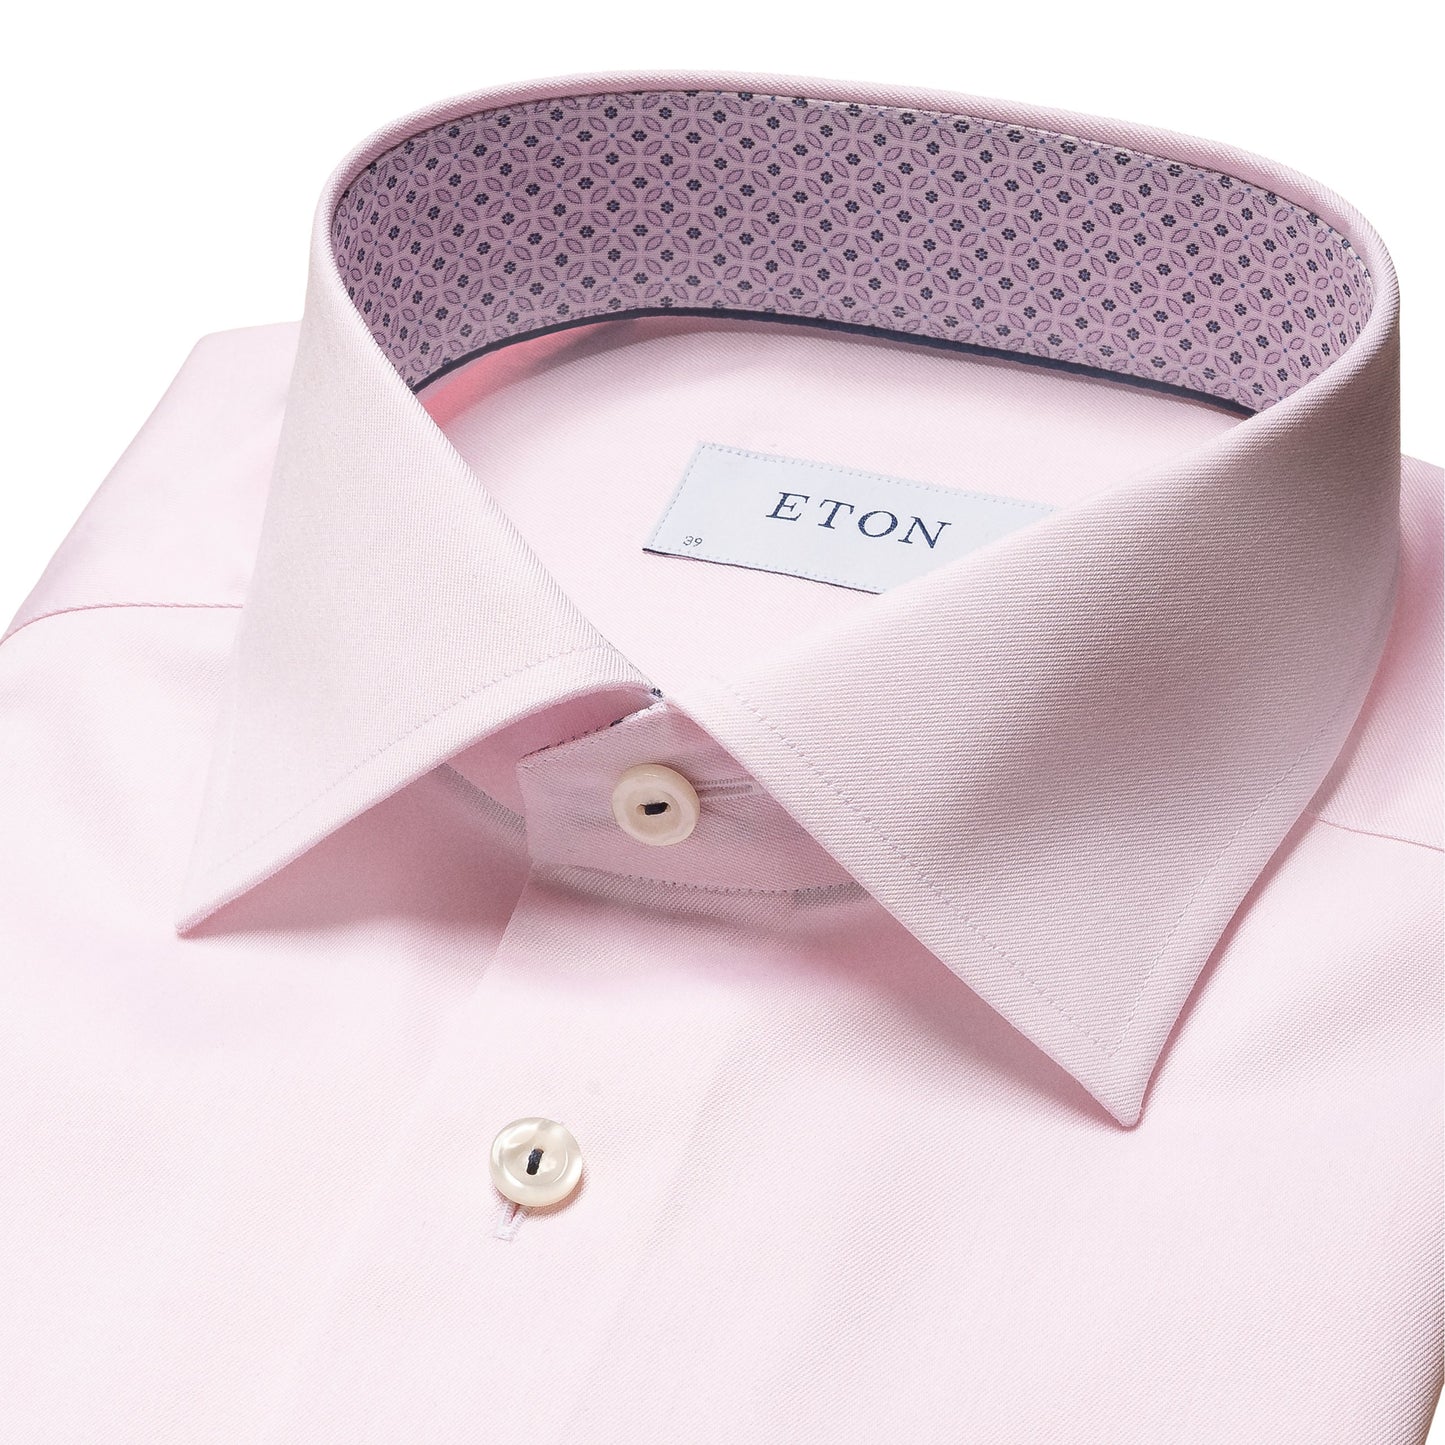 ETON Signature Twill Contemporary Fit Shirt in Pink with Floral Contrast Details 10001046080